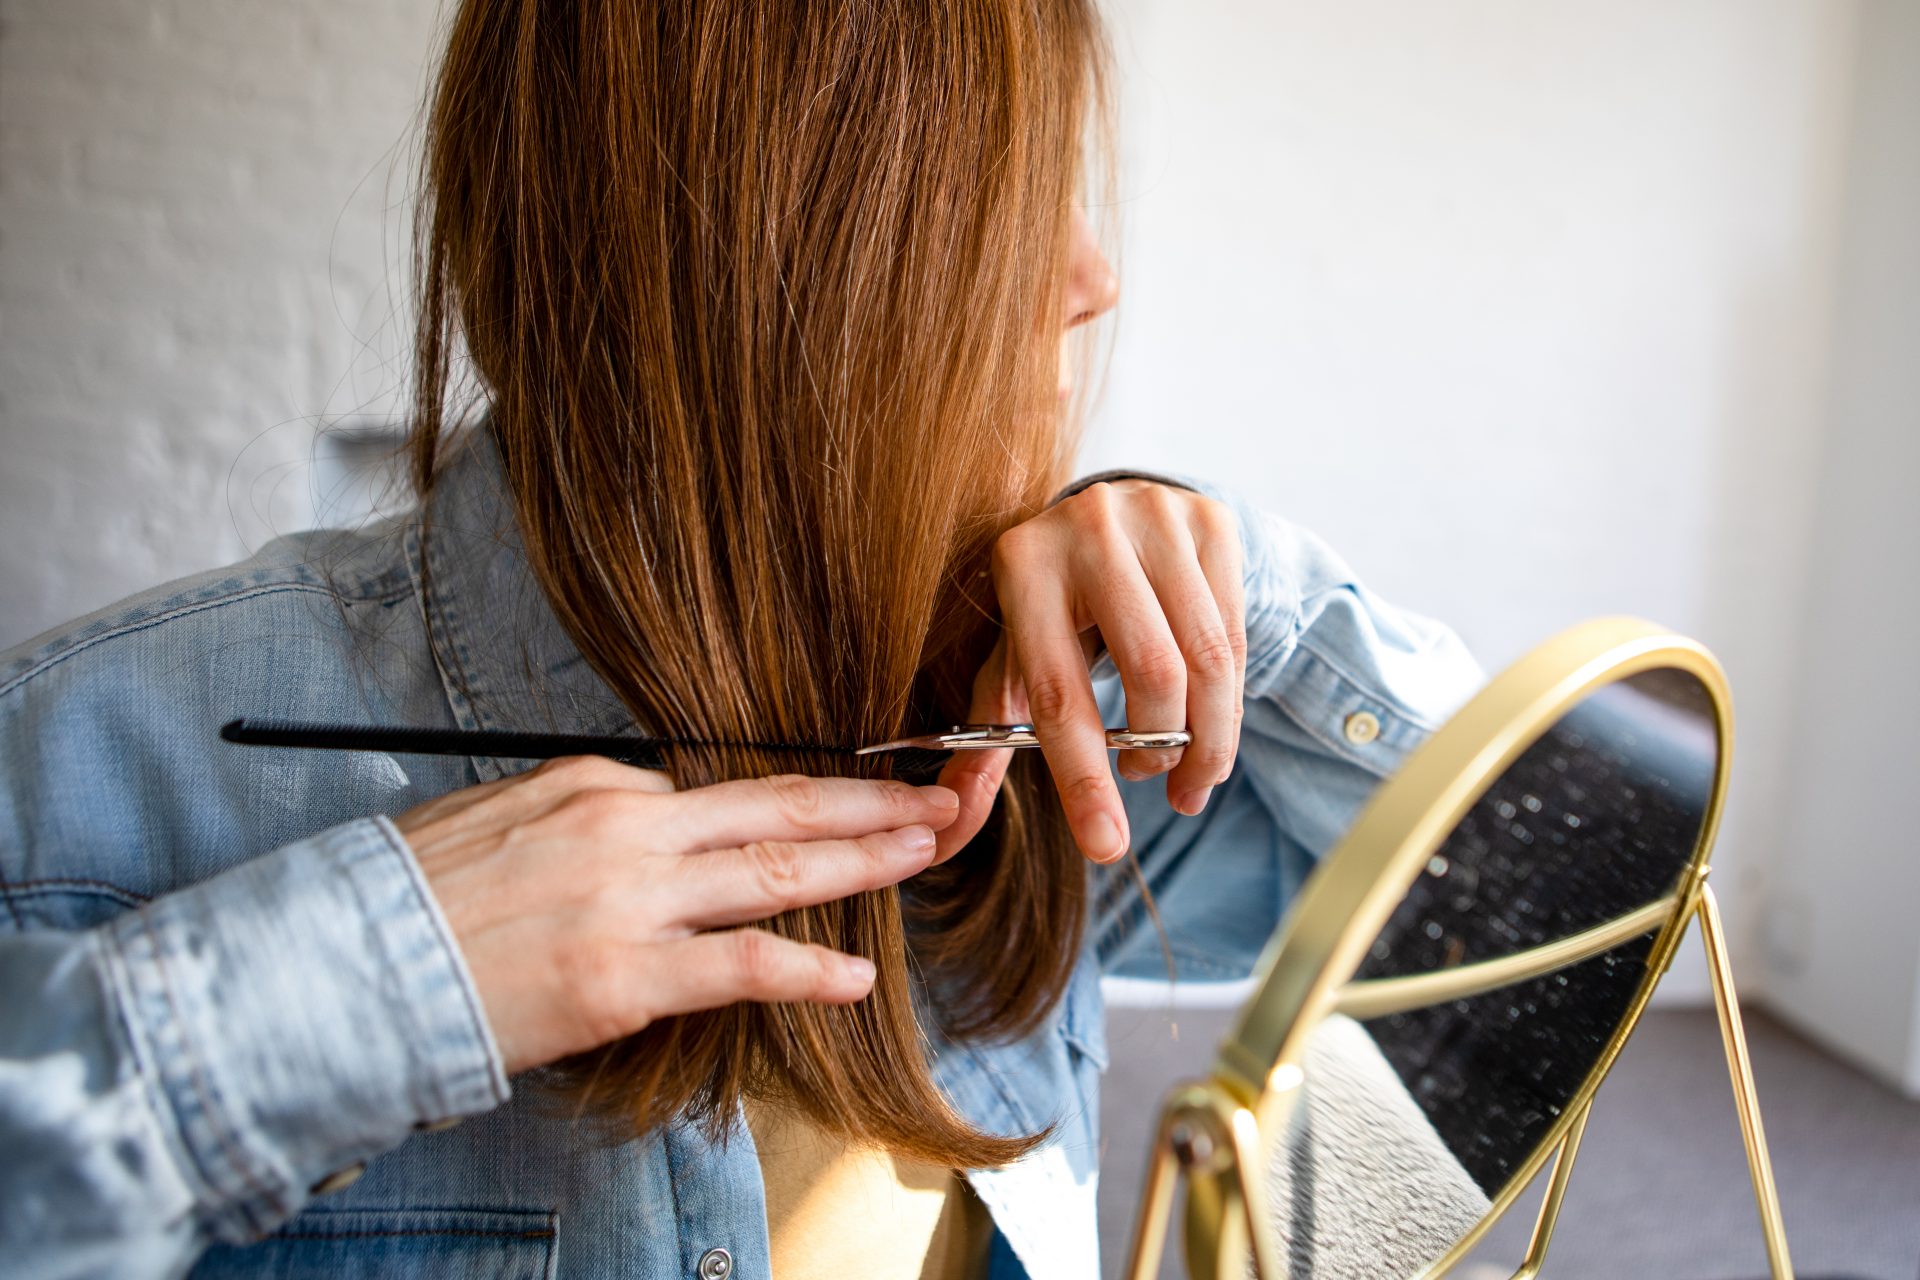 How to cut hair your own hair at home, for all hair lengths